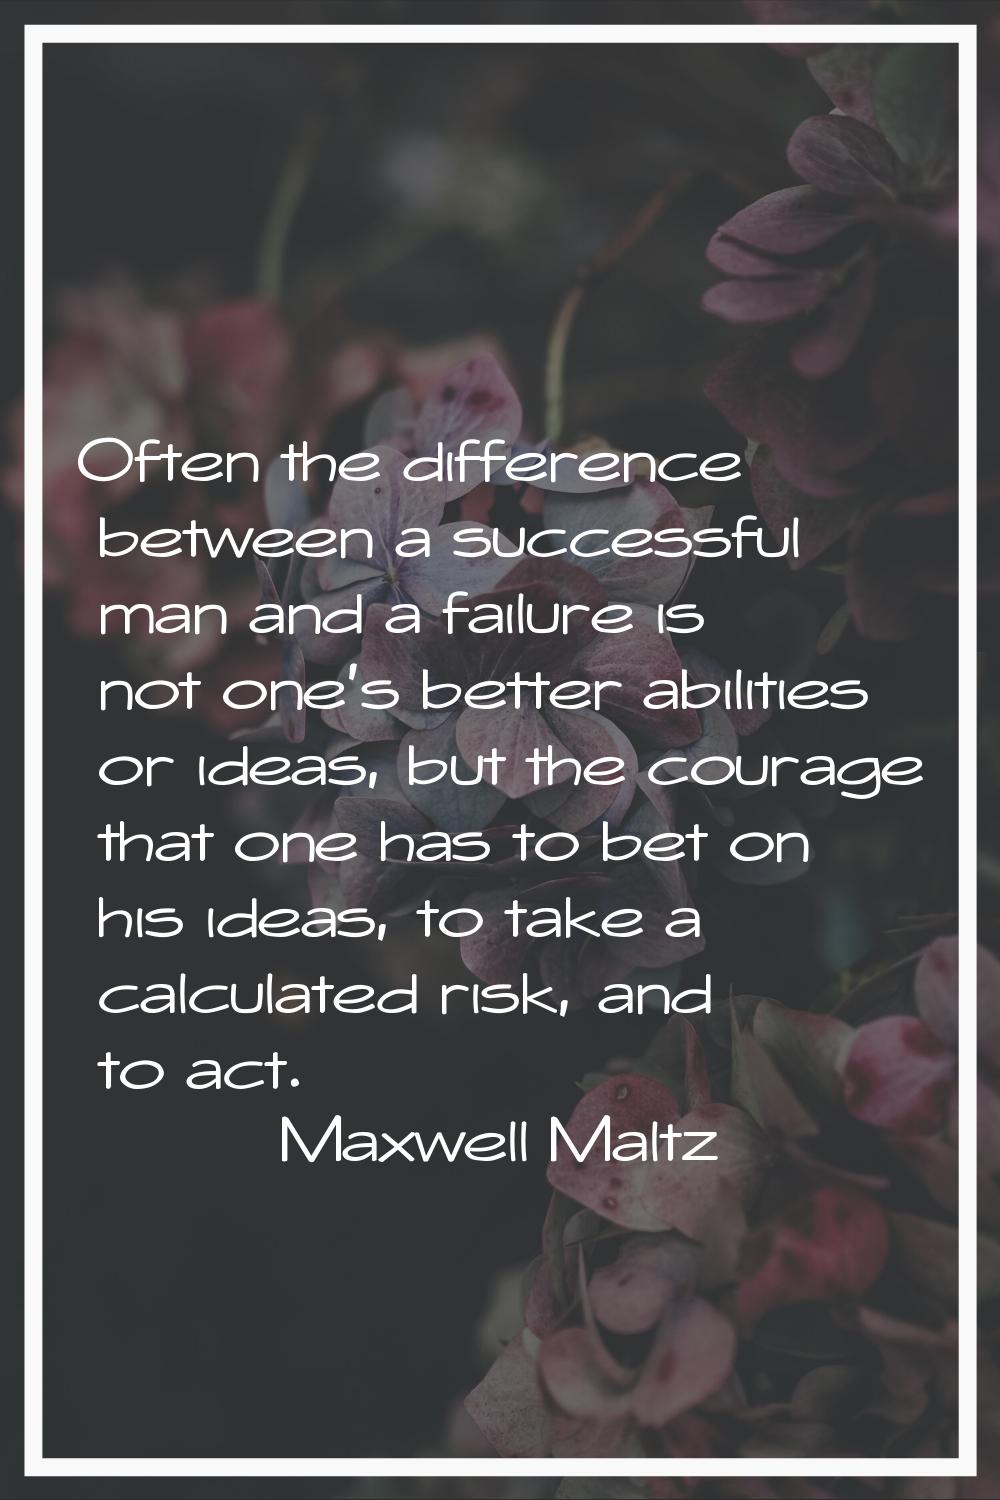 Often the difference between a successful man and a failure is not one's better abilities or ideas,